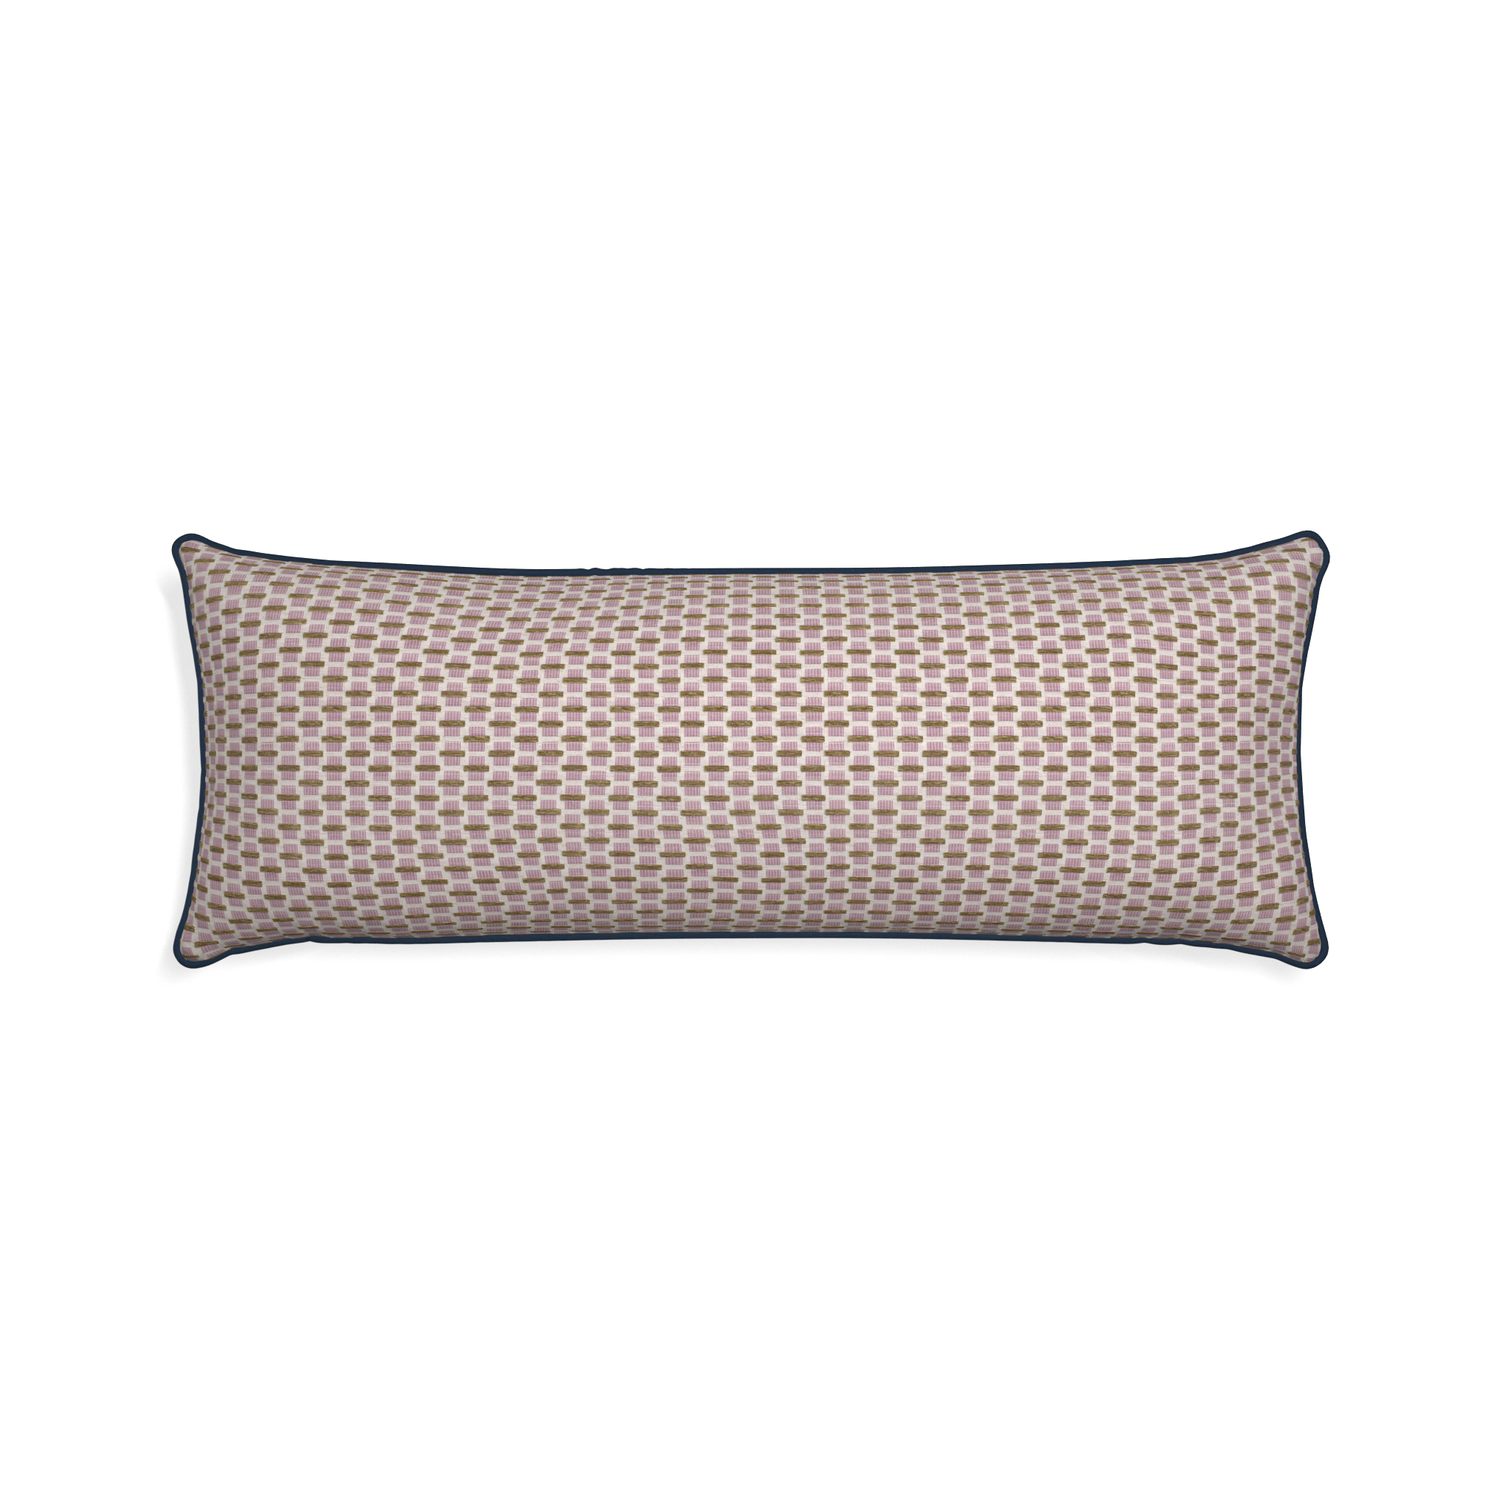 Xl-lumbar willow orchid custom pink geometric chenillepillow with c piping on white background